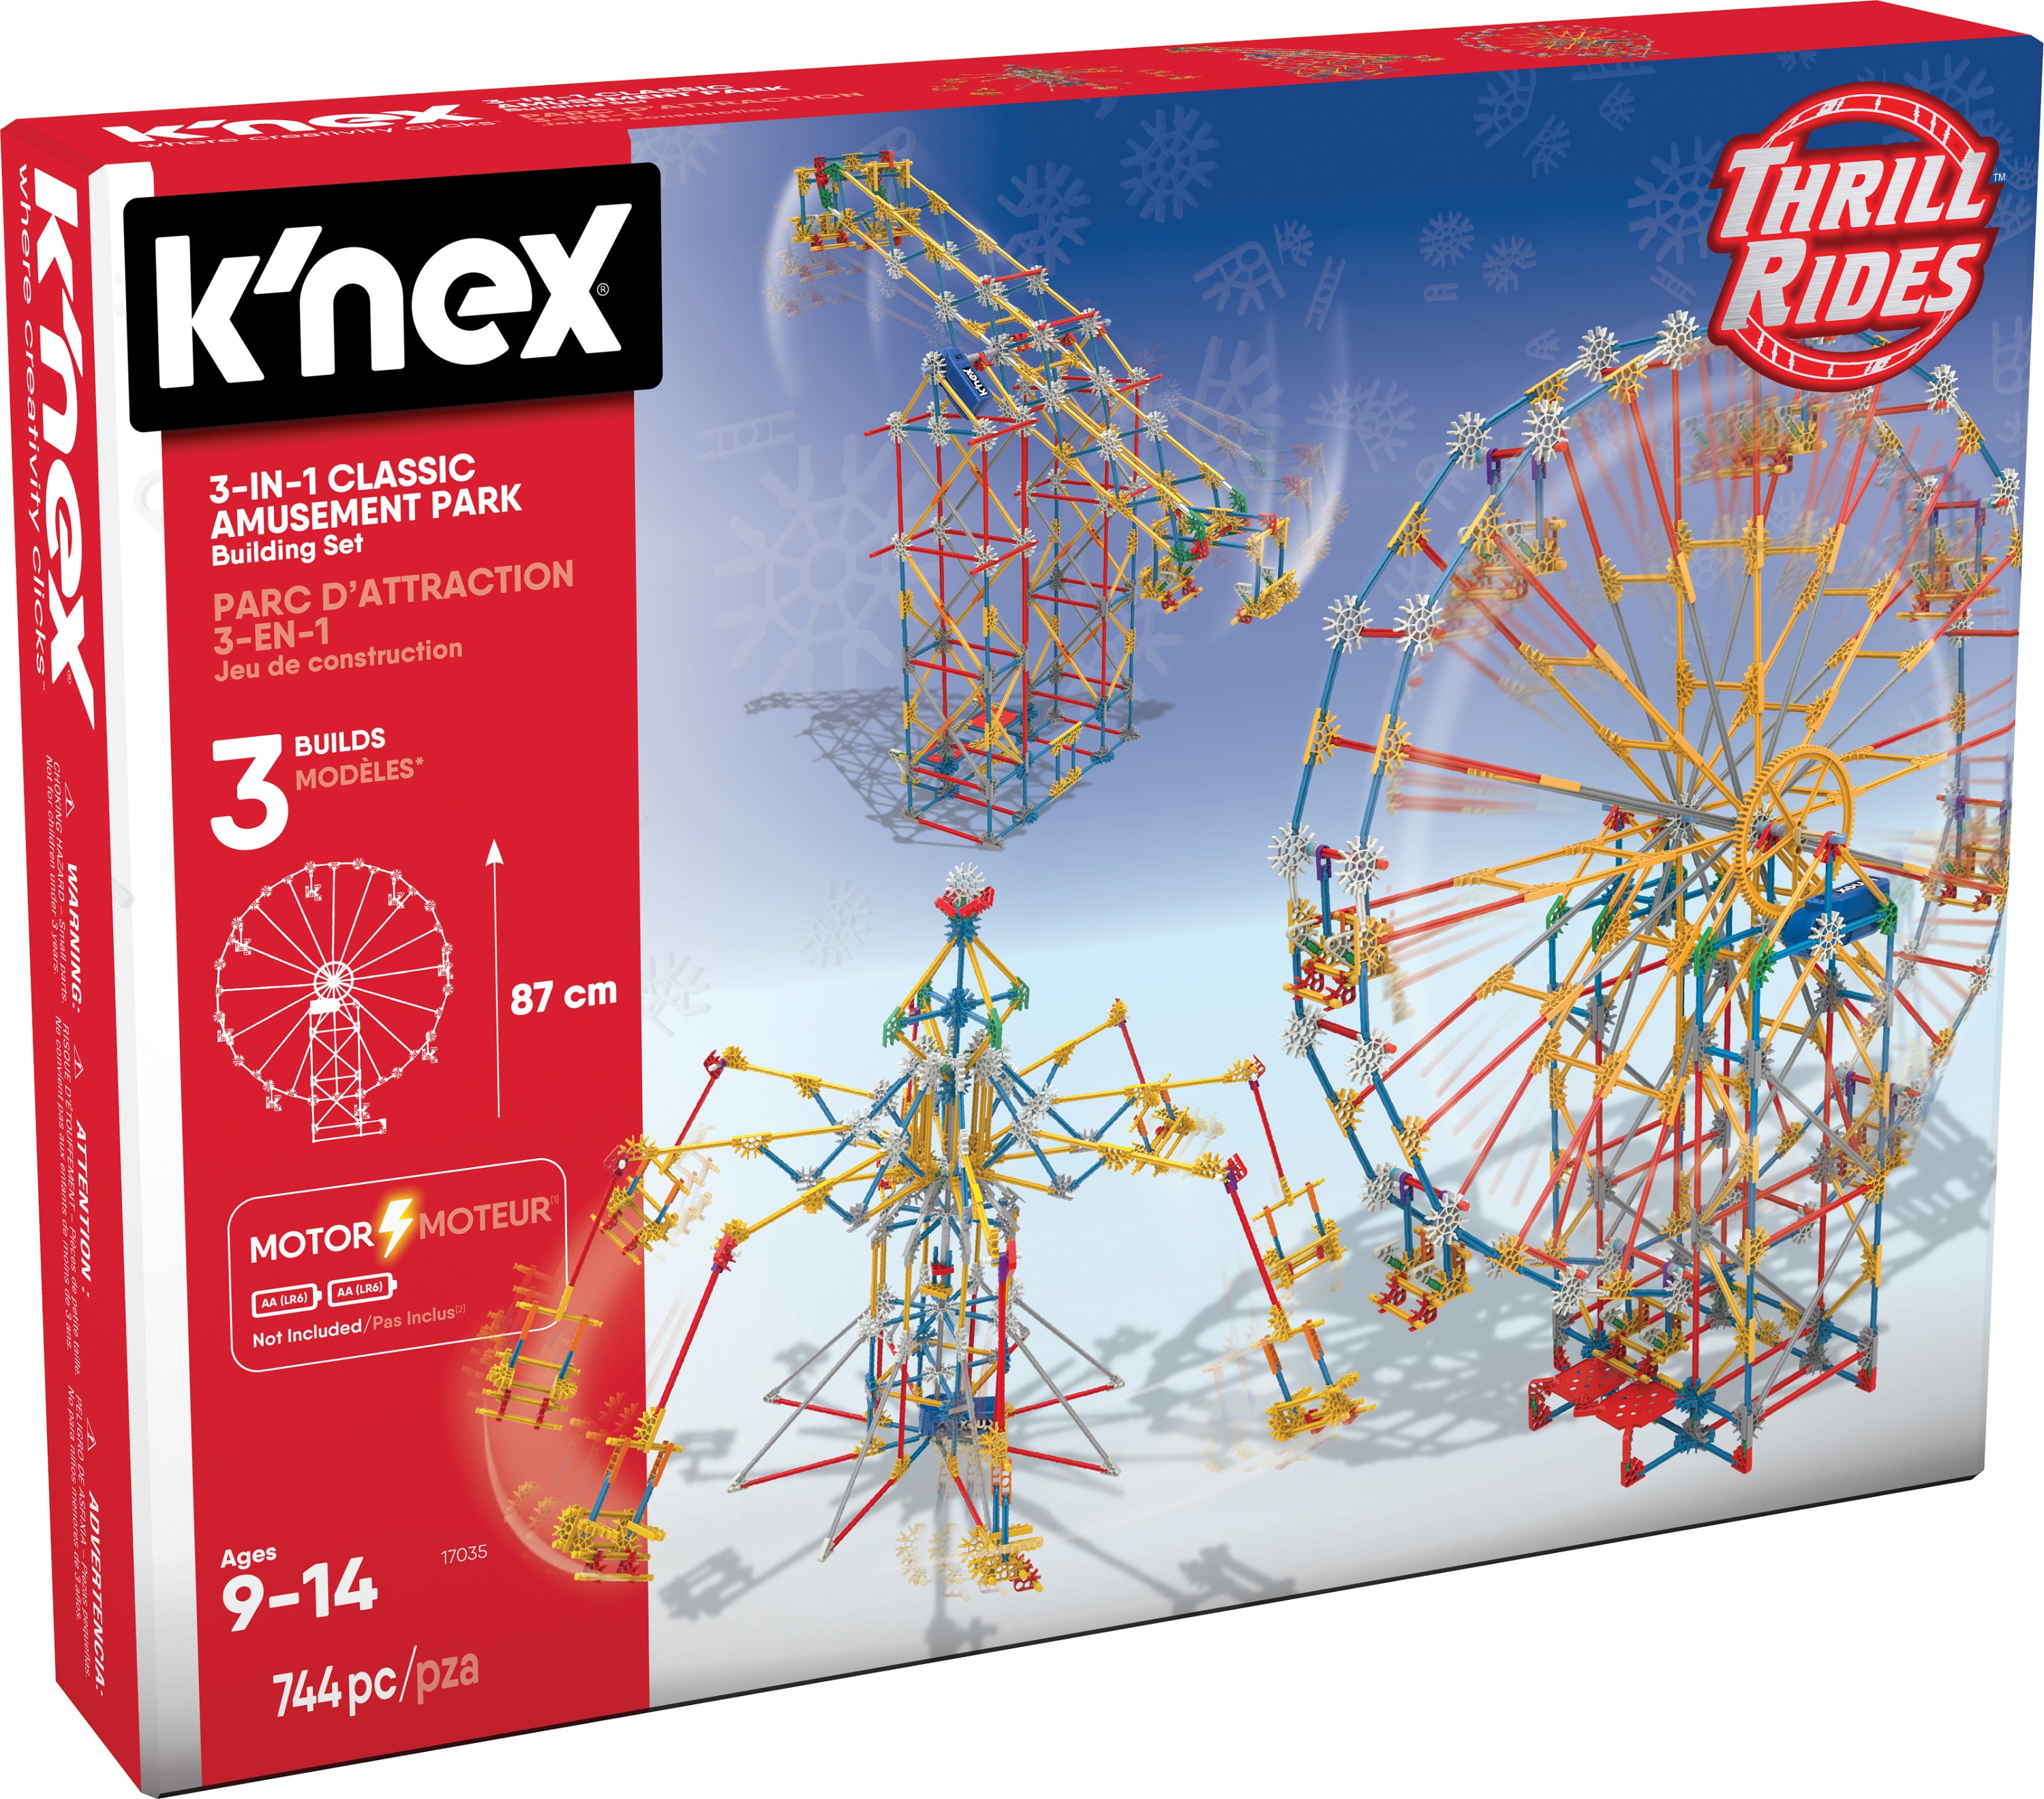 K'NEX Thrill Rides - 3-in-1 Classic Amusement Park Building Set - 744 Pieces - Ages 9 Engineering Education Toy - image 3 of 6